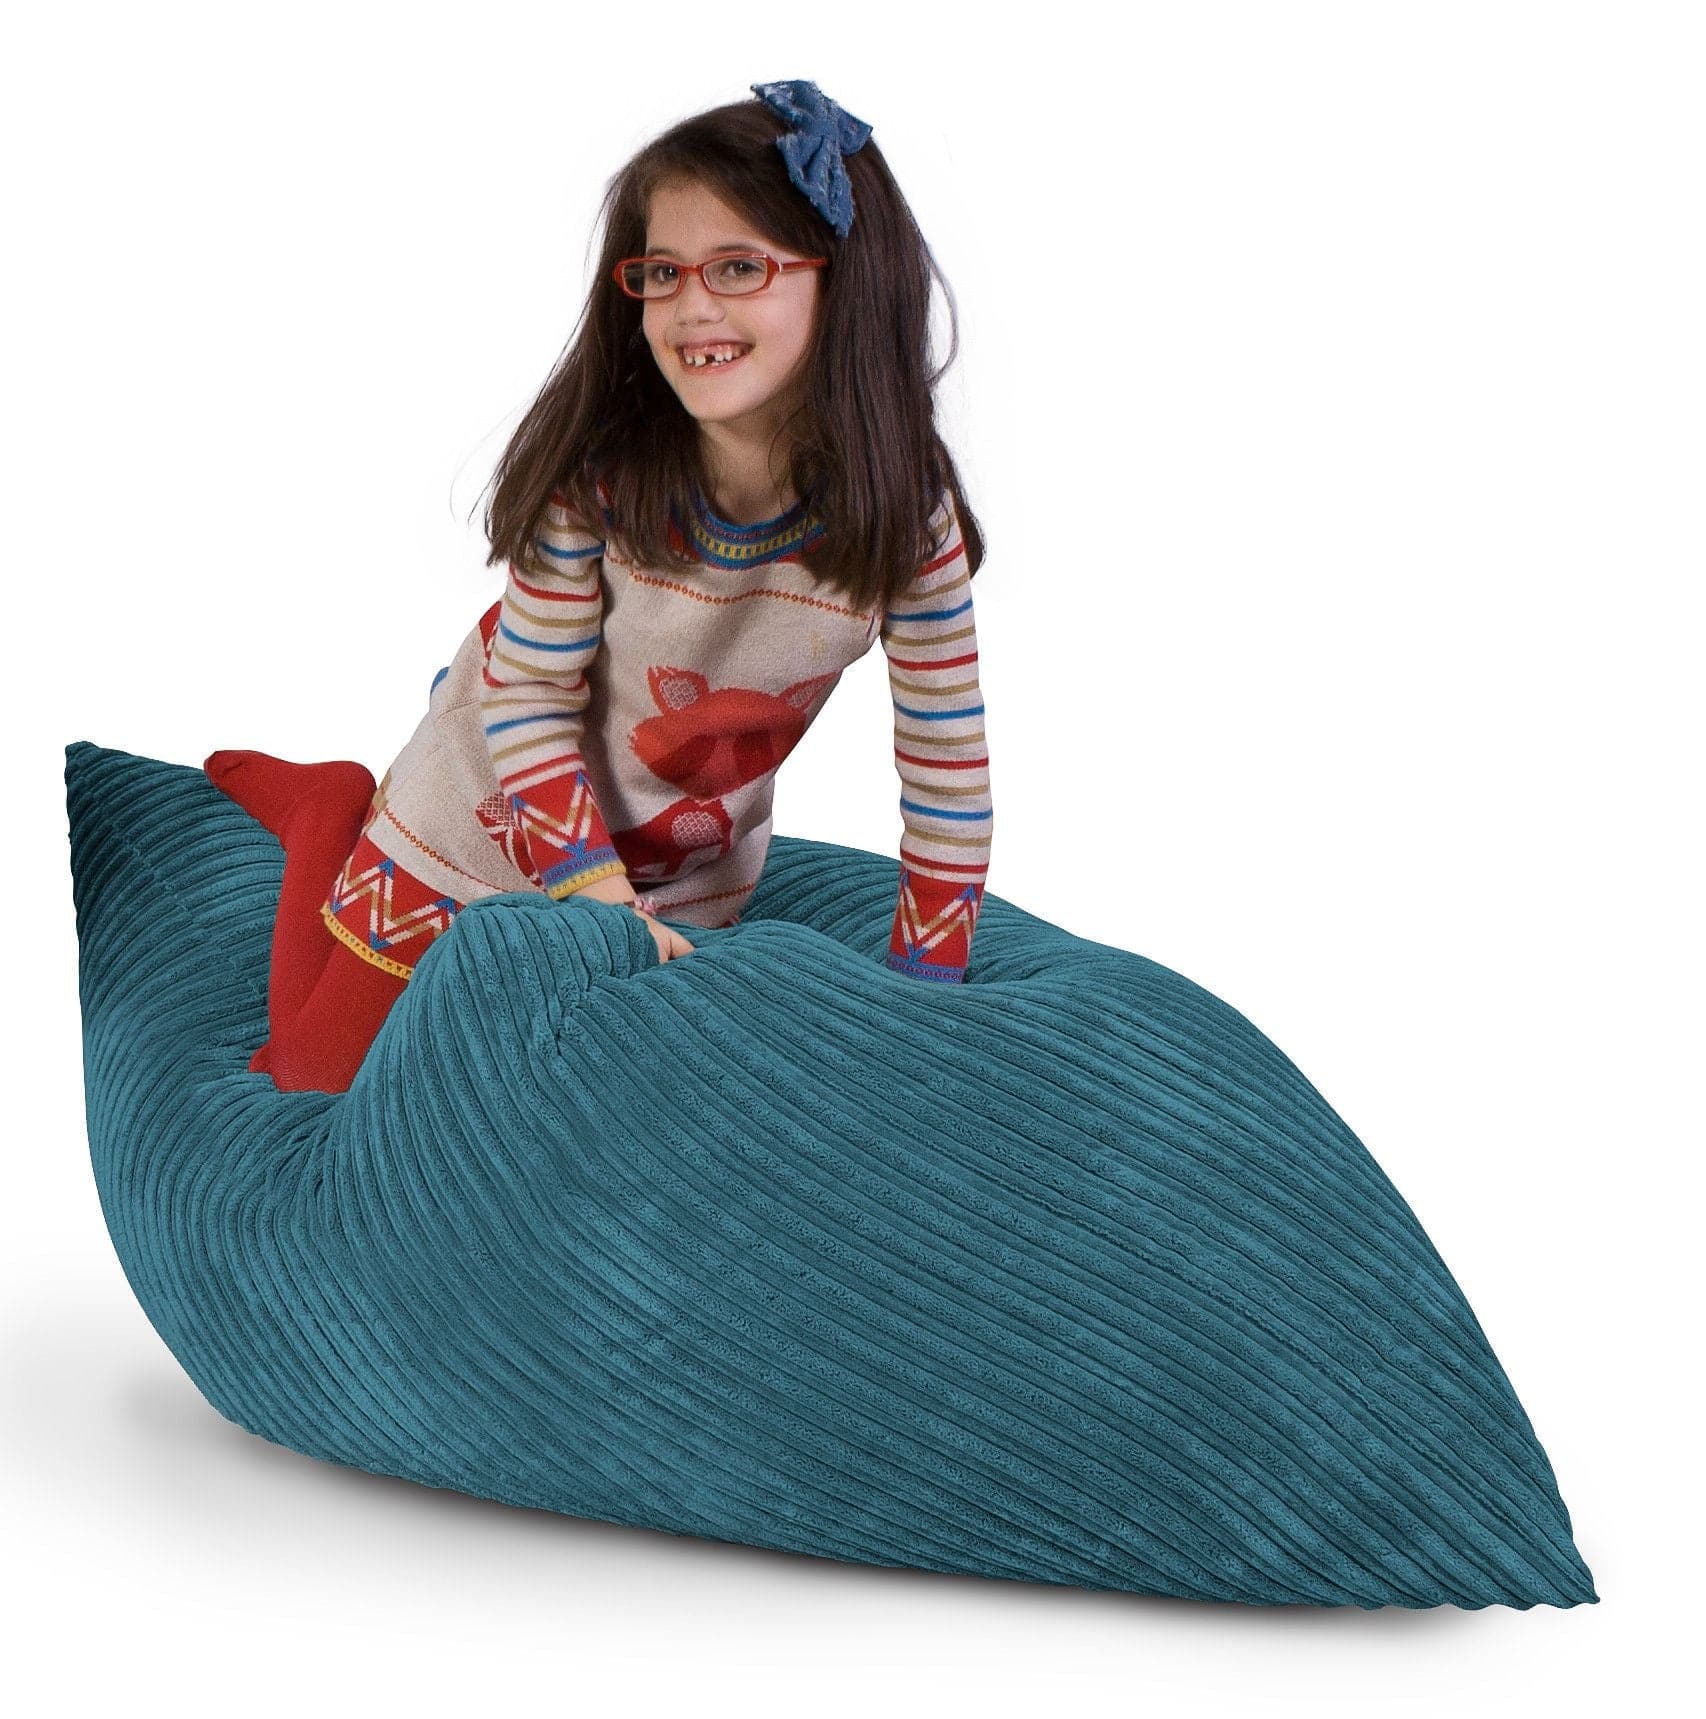 Classic Cord Junior Bean Bag - Green, This Classic Cord beanbag is a super tactile lounging cushion, perfect for kids ranging from 5 - 12 years old. Being so large, when turned on its side.The classic cord beanbag may also be used as a cosy armchair style beanbag for young adults though.Made with soft classic cord fabric, it is very cosy and comfyFeatures Ideal for the house and garden Seating position may be varied to create a lounger, seat or bed style 5+ seating positions possible Designed with children 